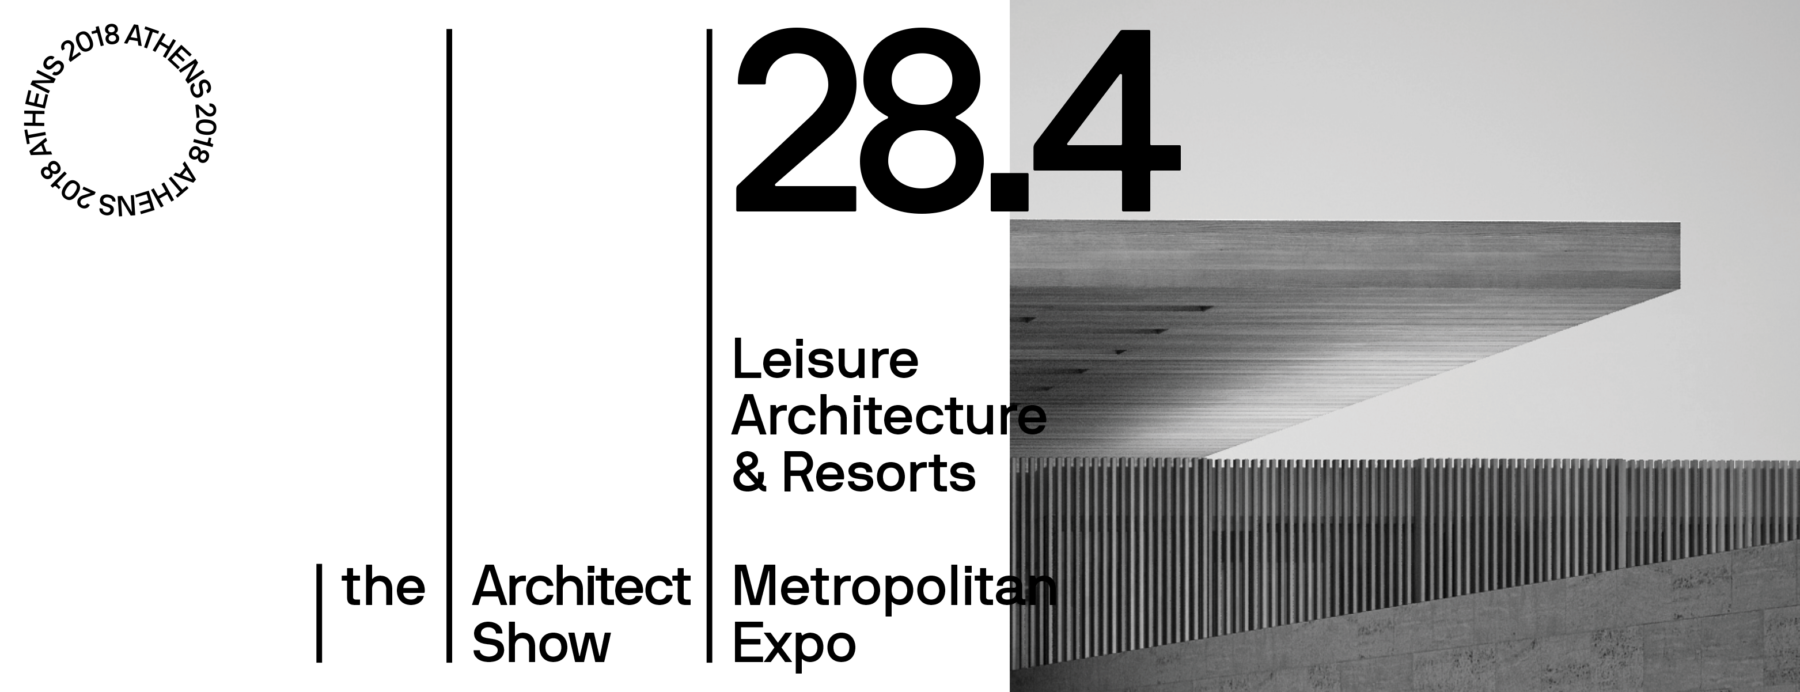 The Architect Show 2018